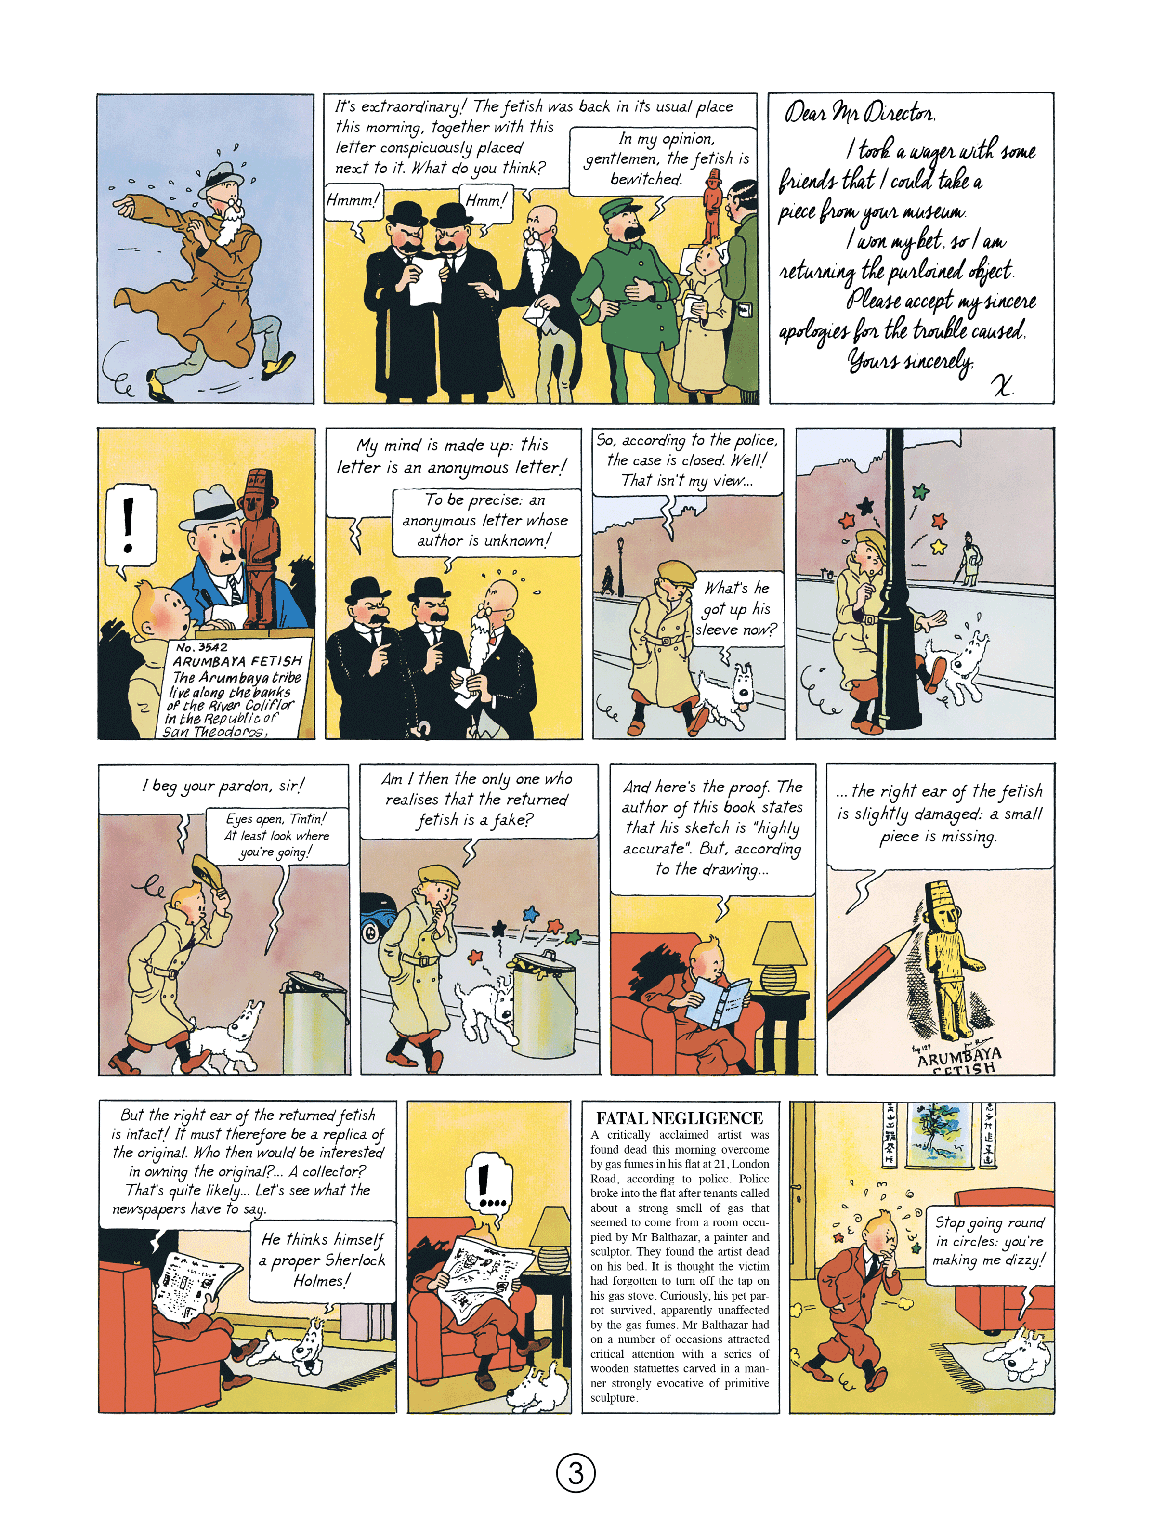 The Broken Ear (The Adventures of Tintin) by Hergé